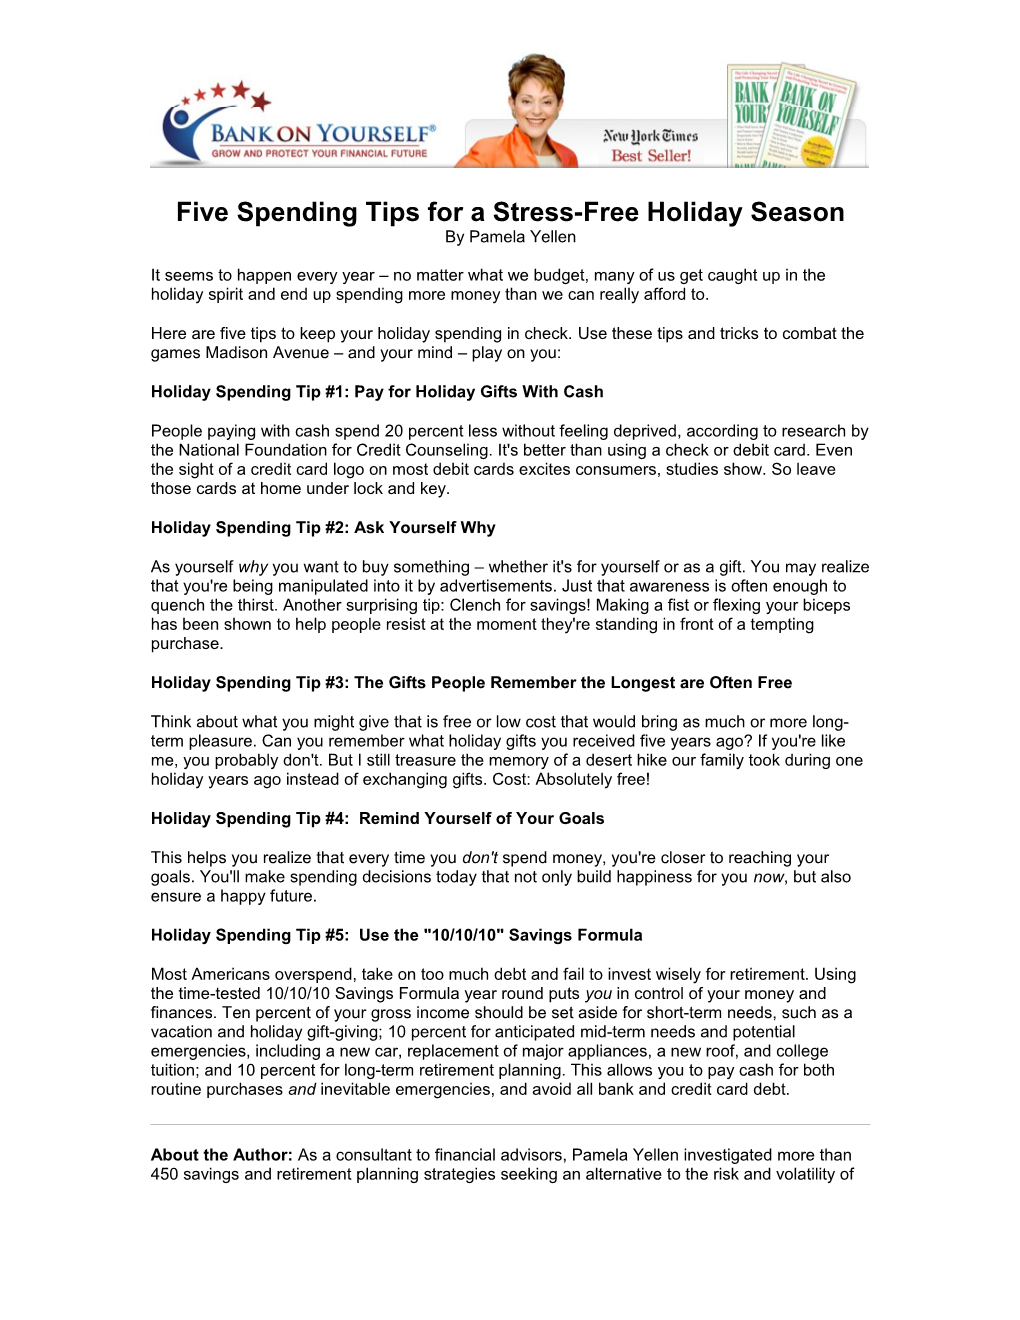 Five Spending Tips for a Stress-Free Holiday Season